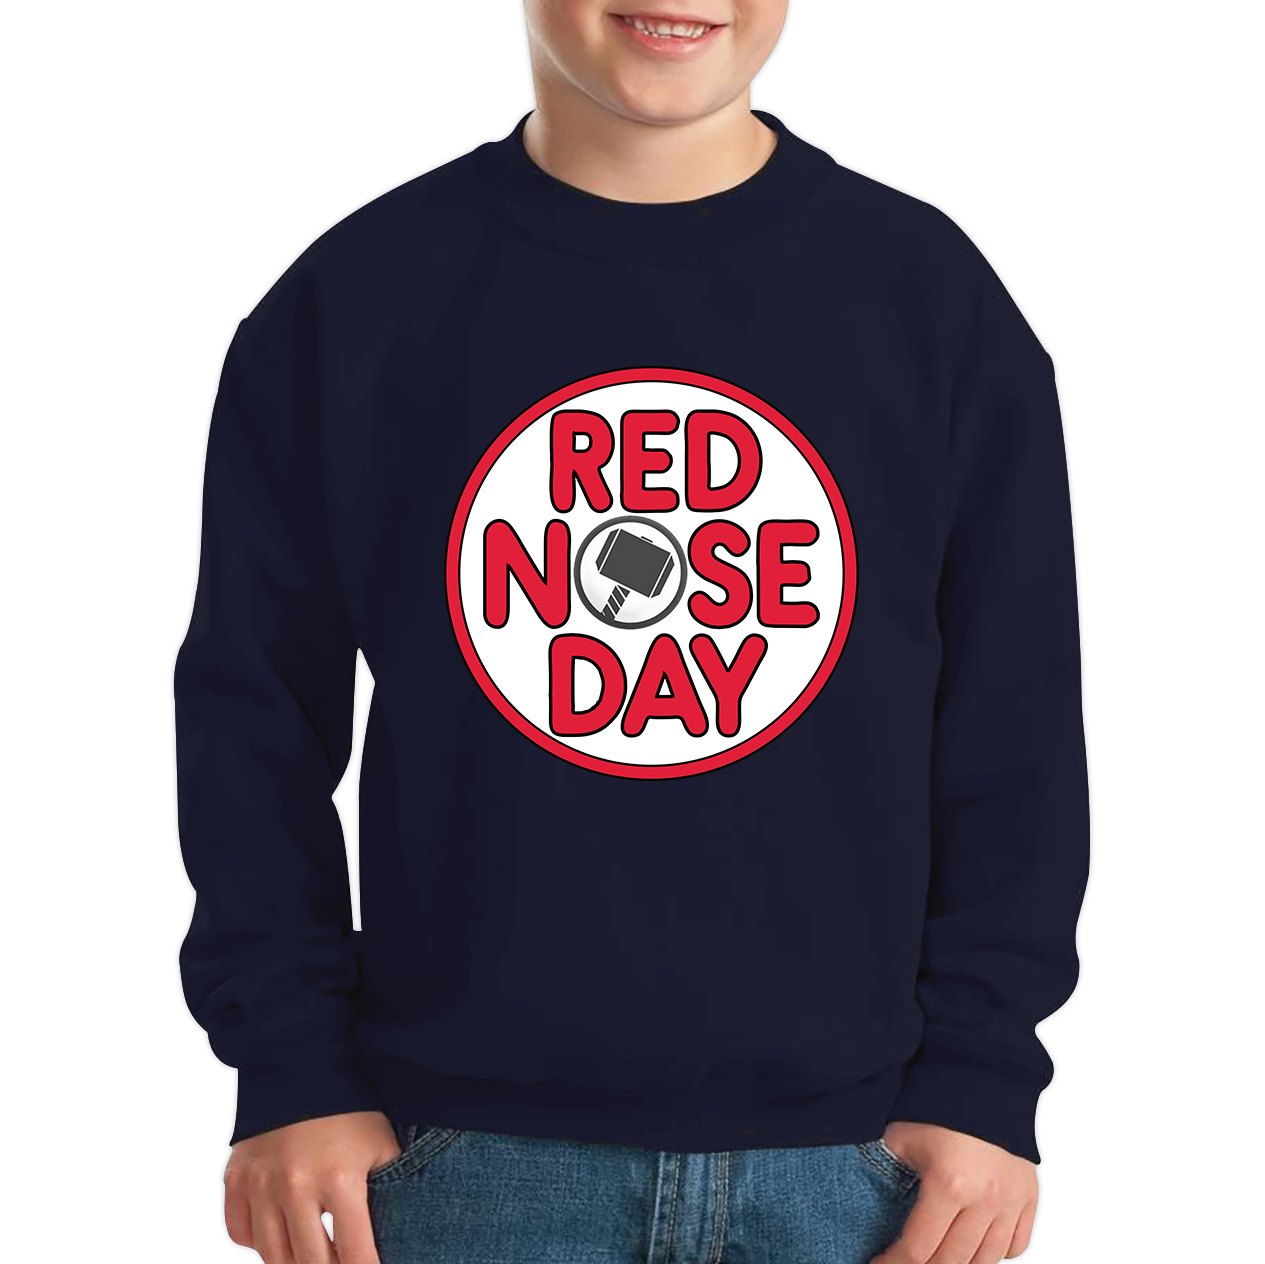 Marvel Avenger Thor Hammer Red Nose Day Kids Sweatshirt. 50% Goes To Charity